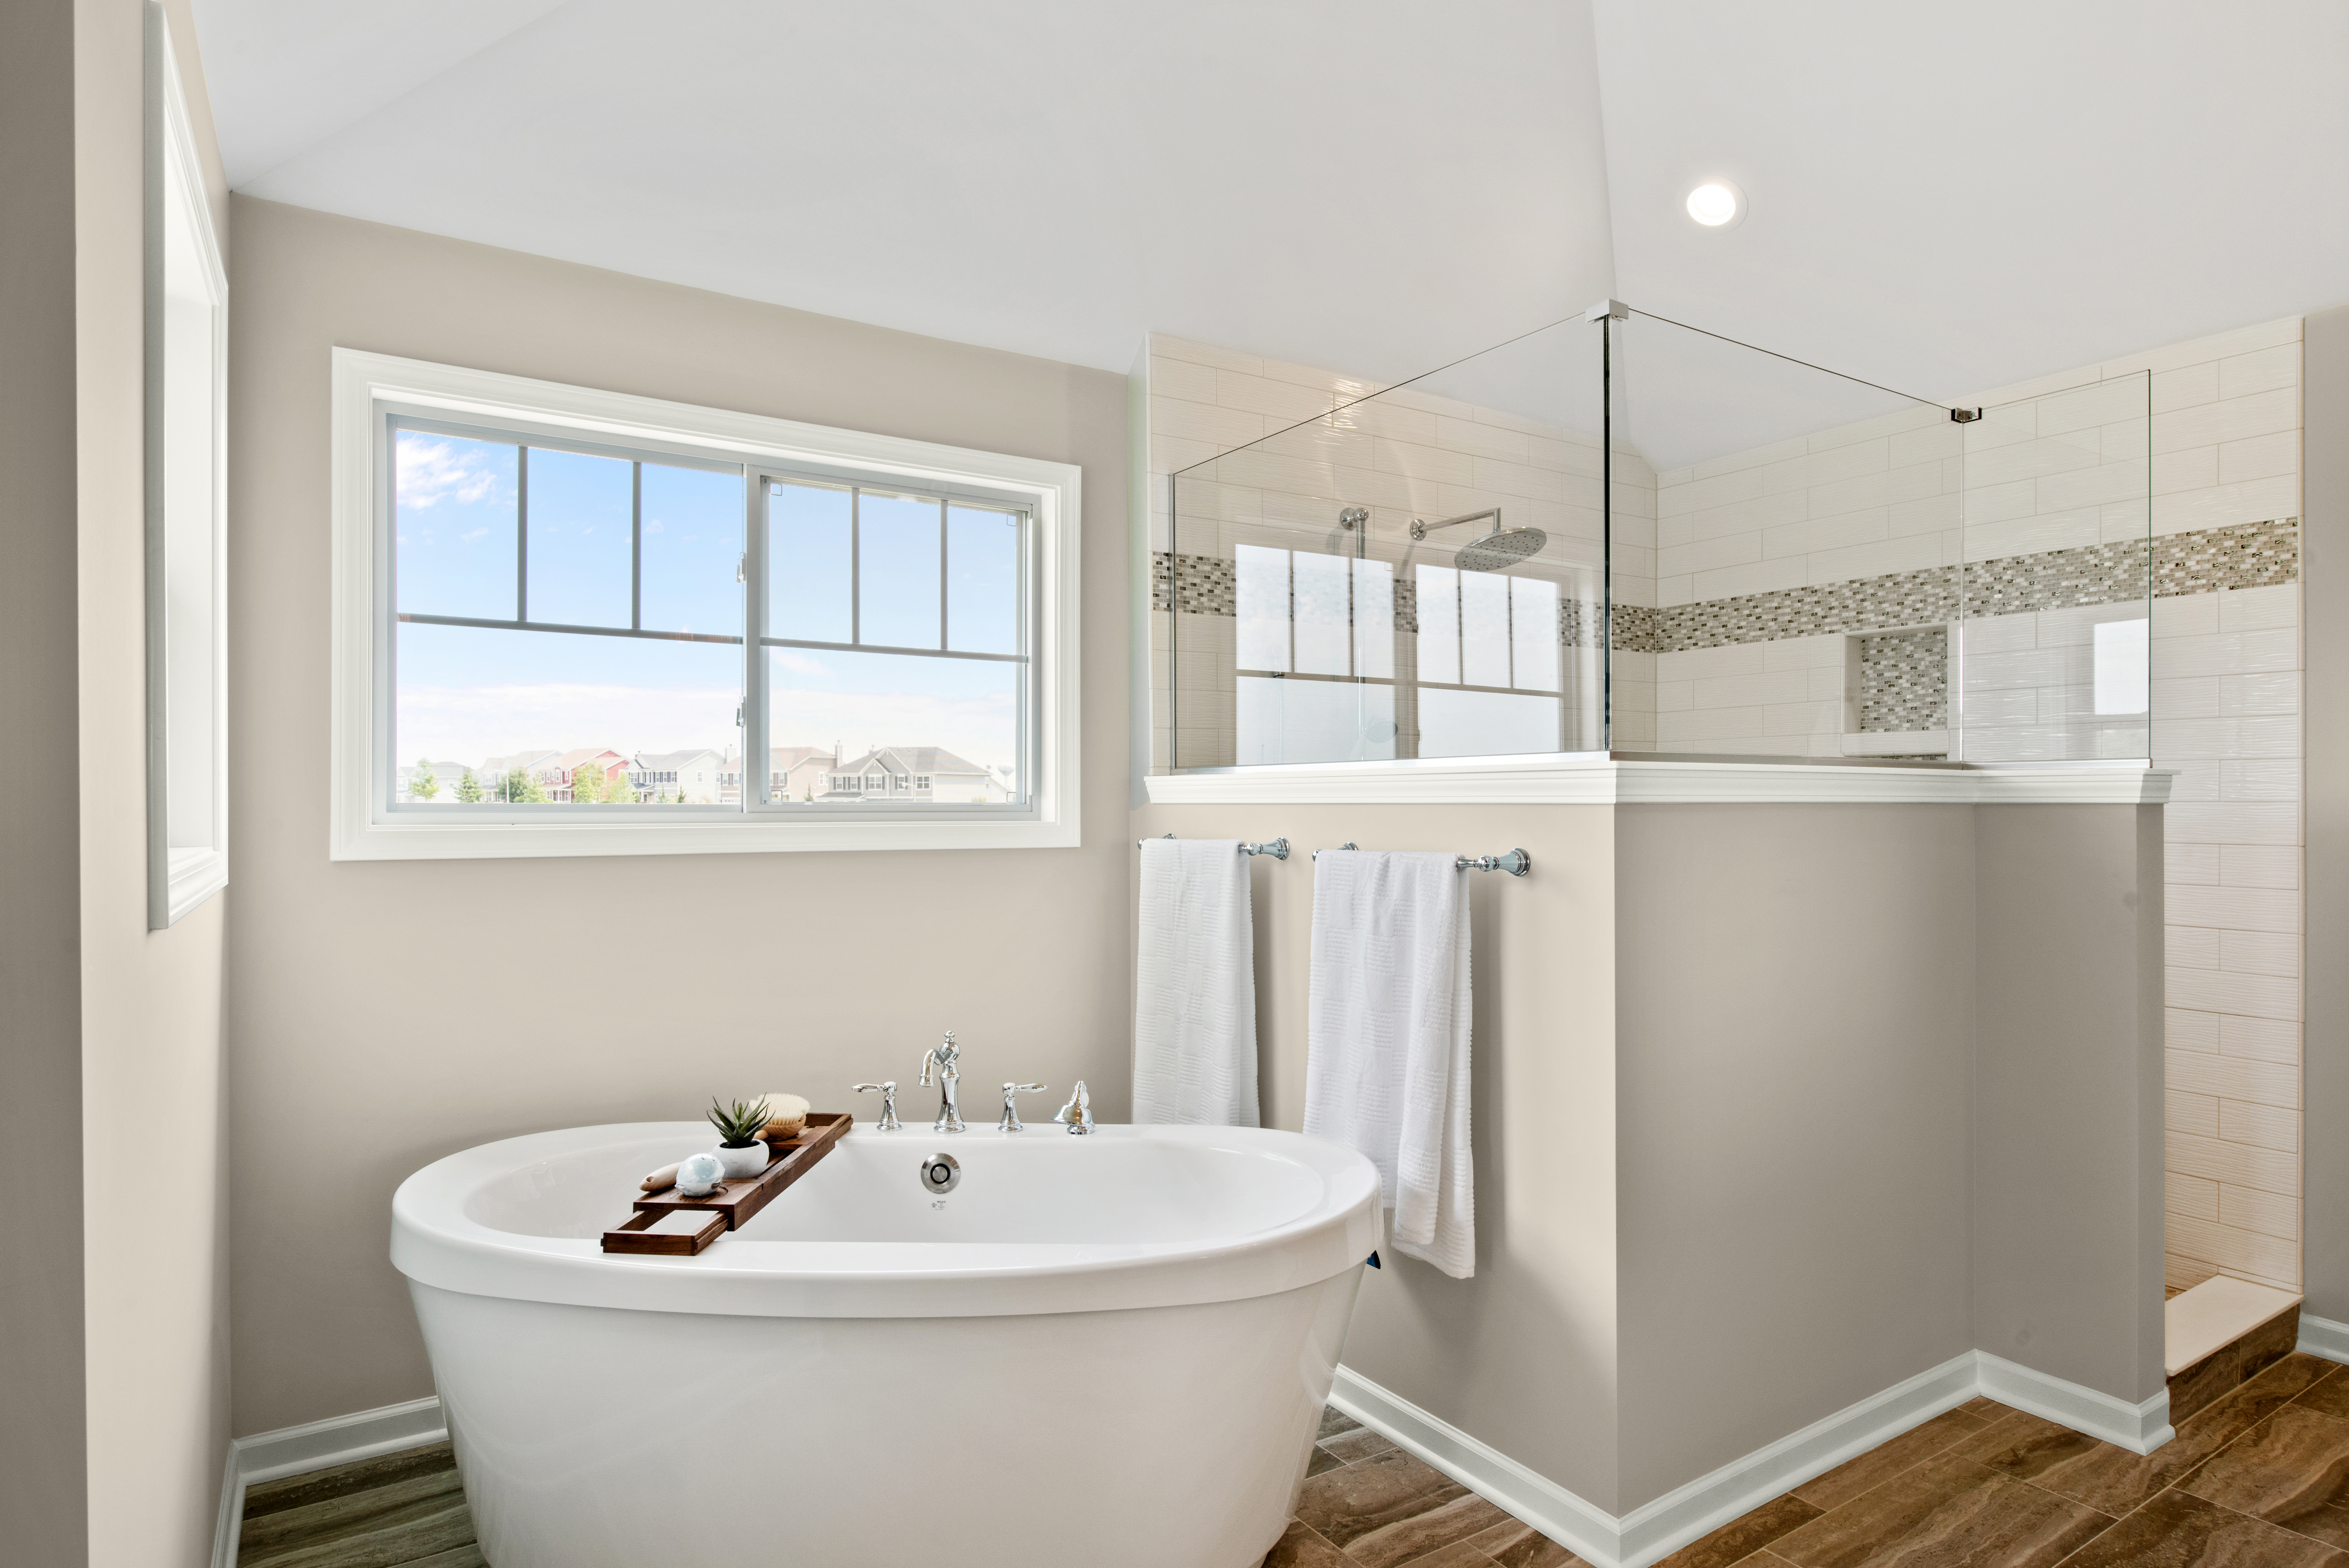 A large bathroom painted in Even Better Beige, with a walk-in shower and tub like a home spa.